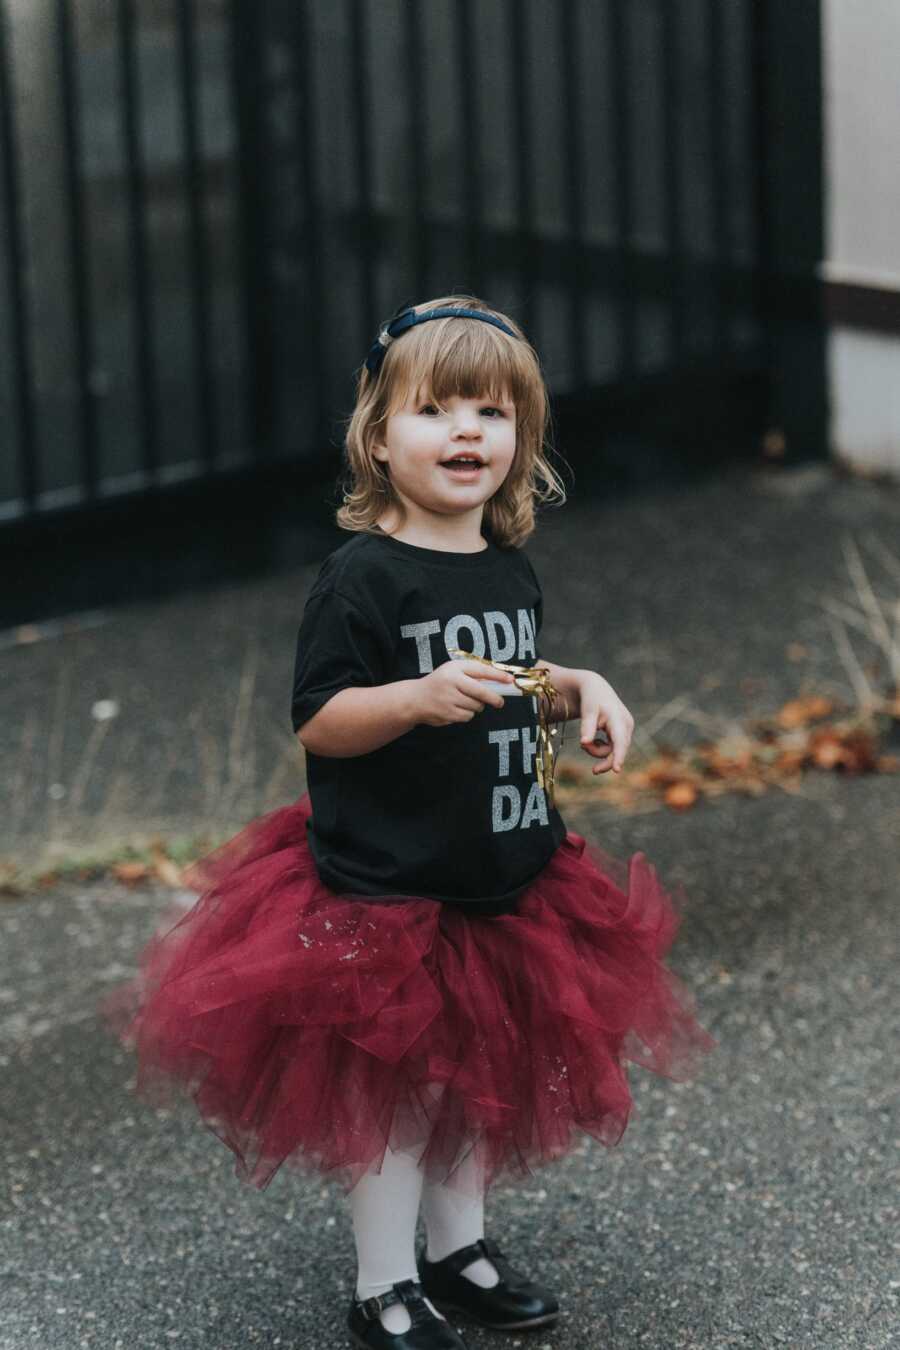 An adopted little girl in a tutu stands on pavement in front of black gate